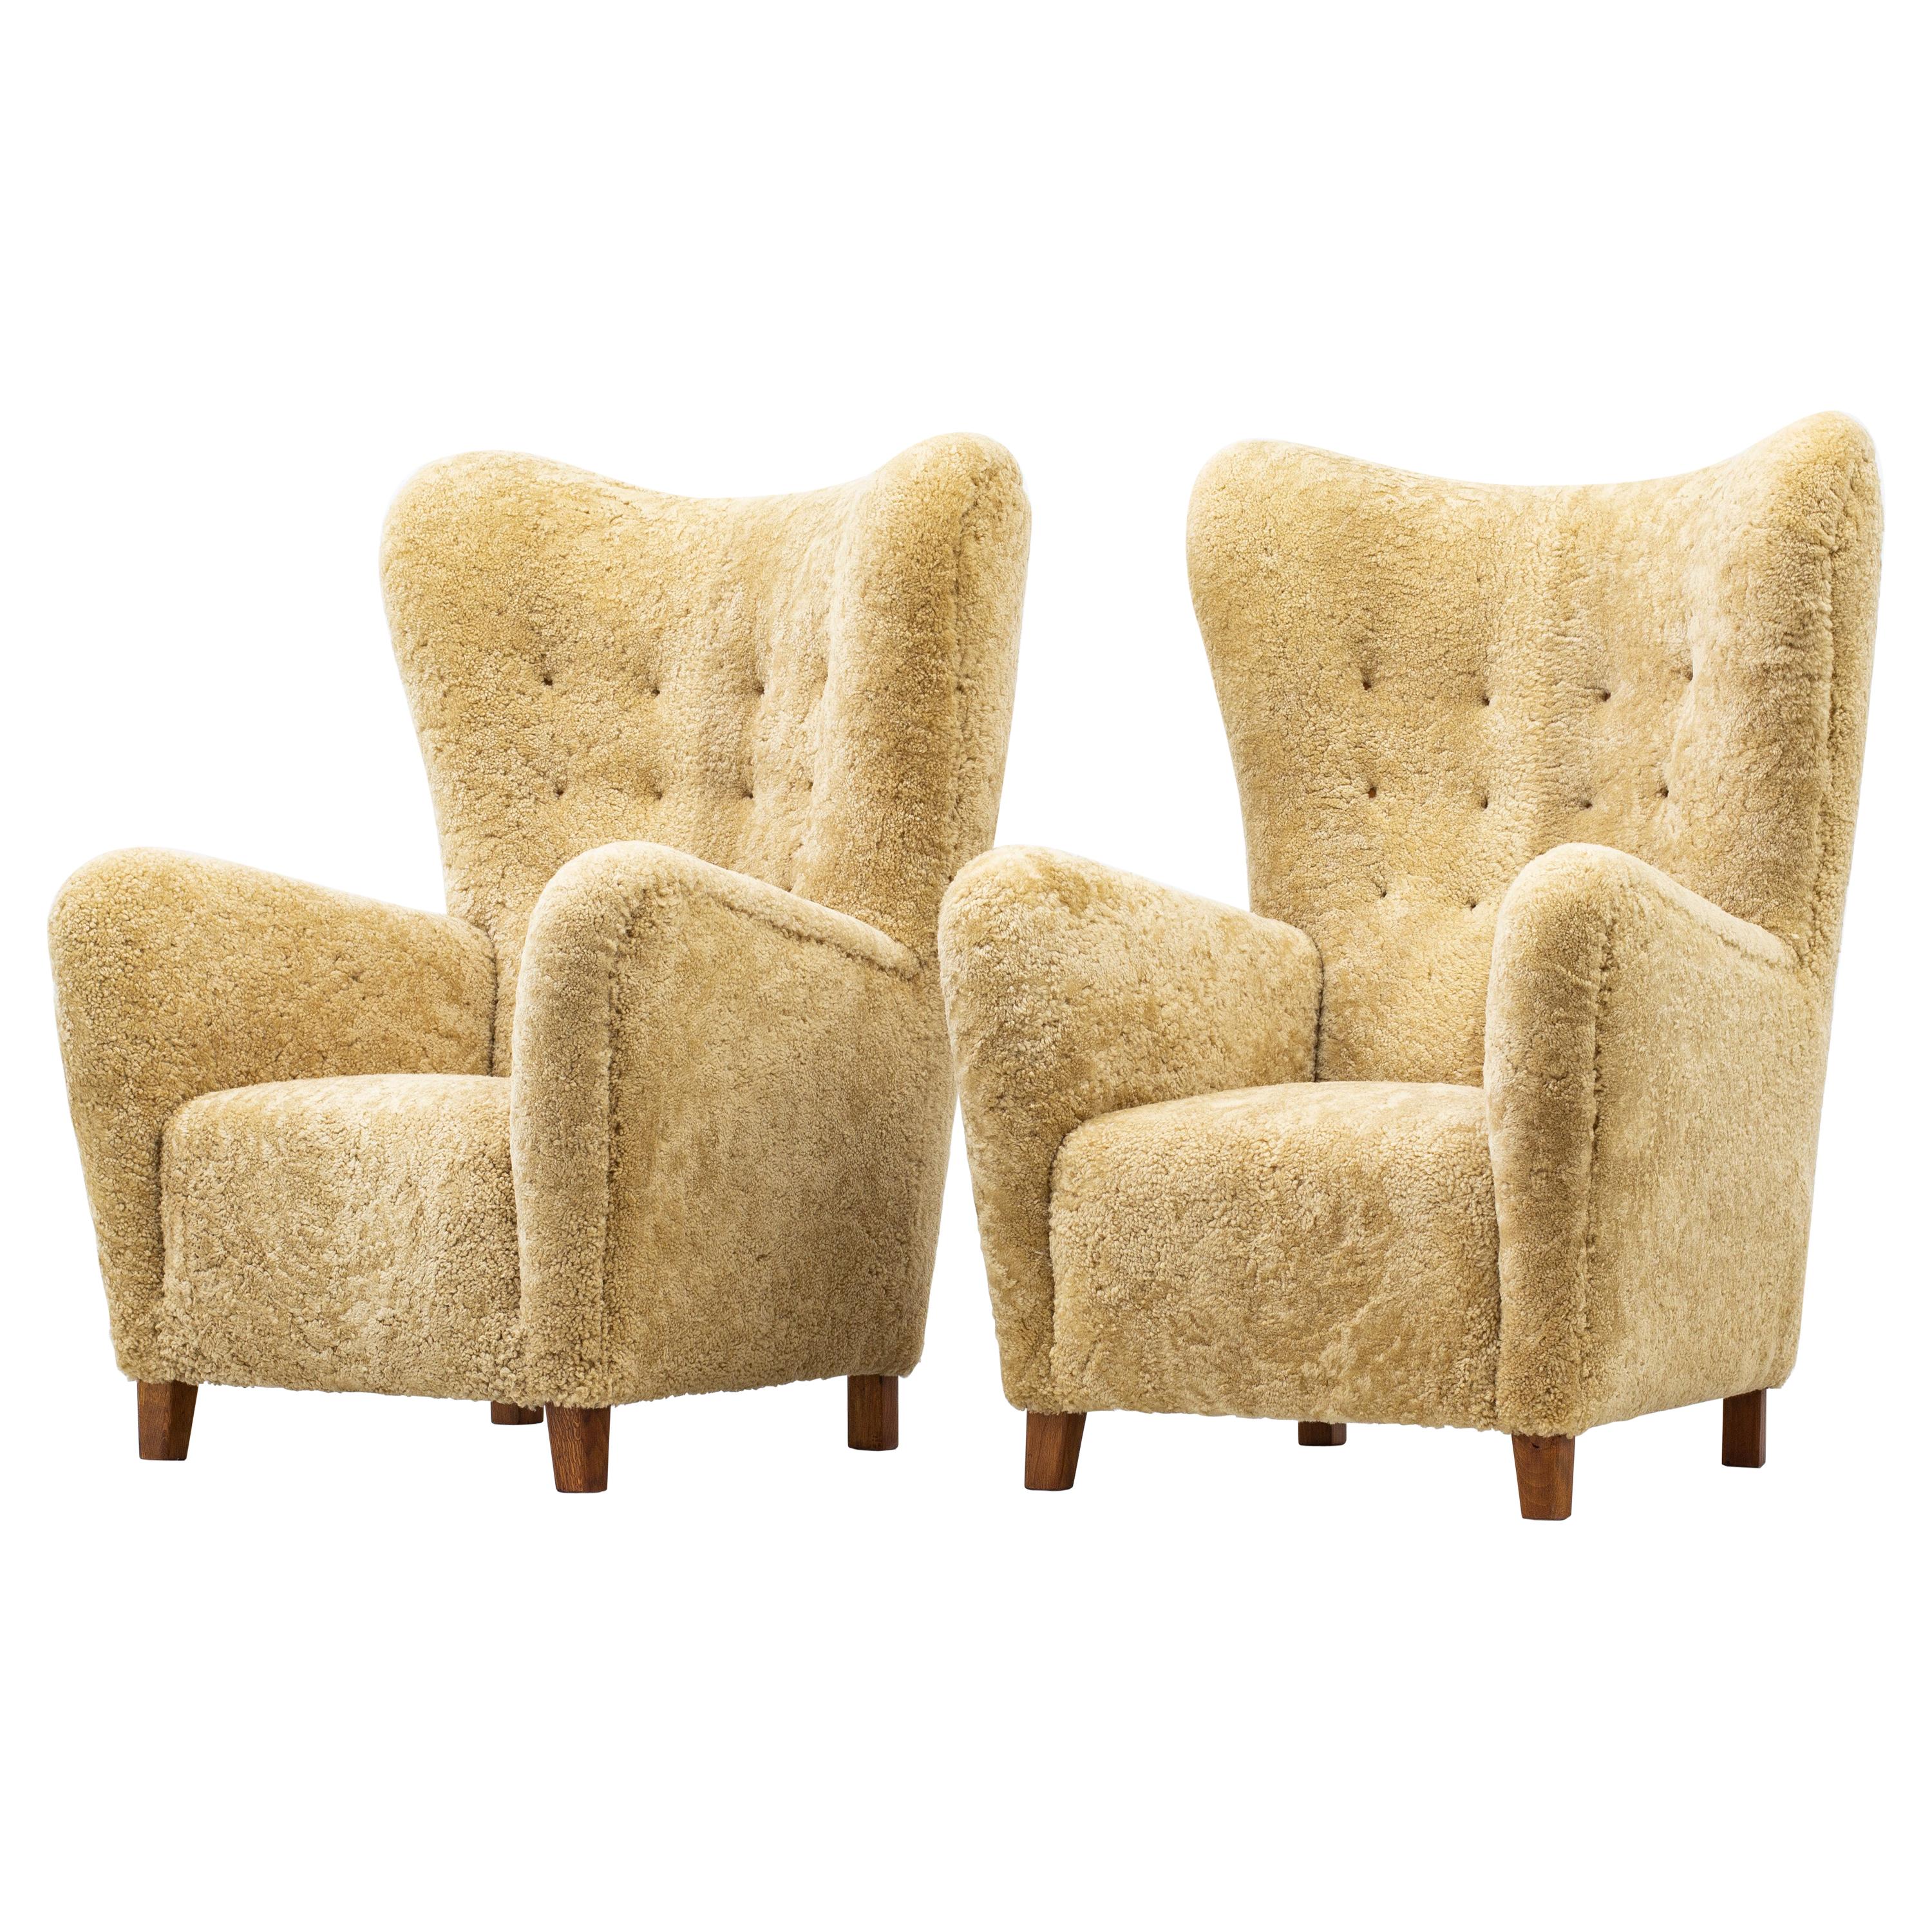 "1672" Wingback Chairs by Fritz Hansen, with Sheep Skin, Denmark, 1940s